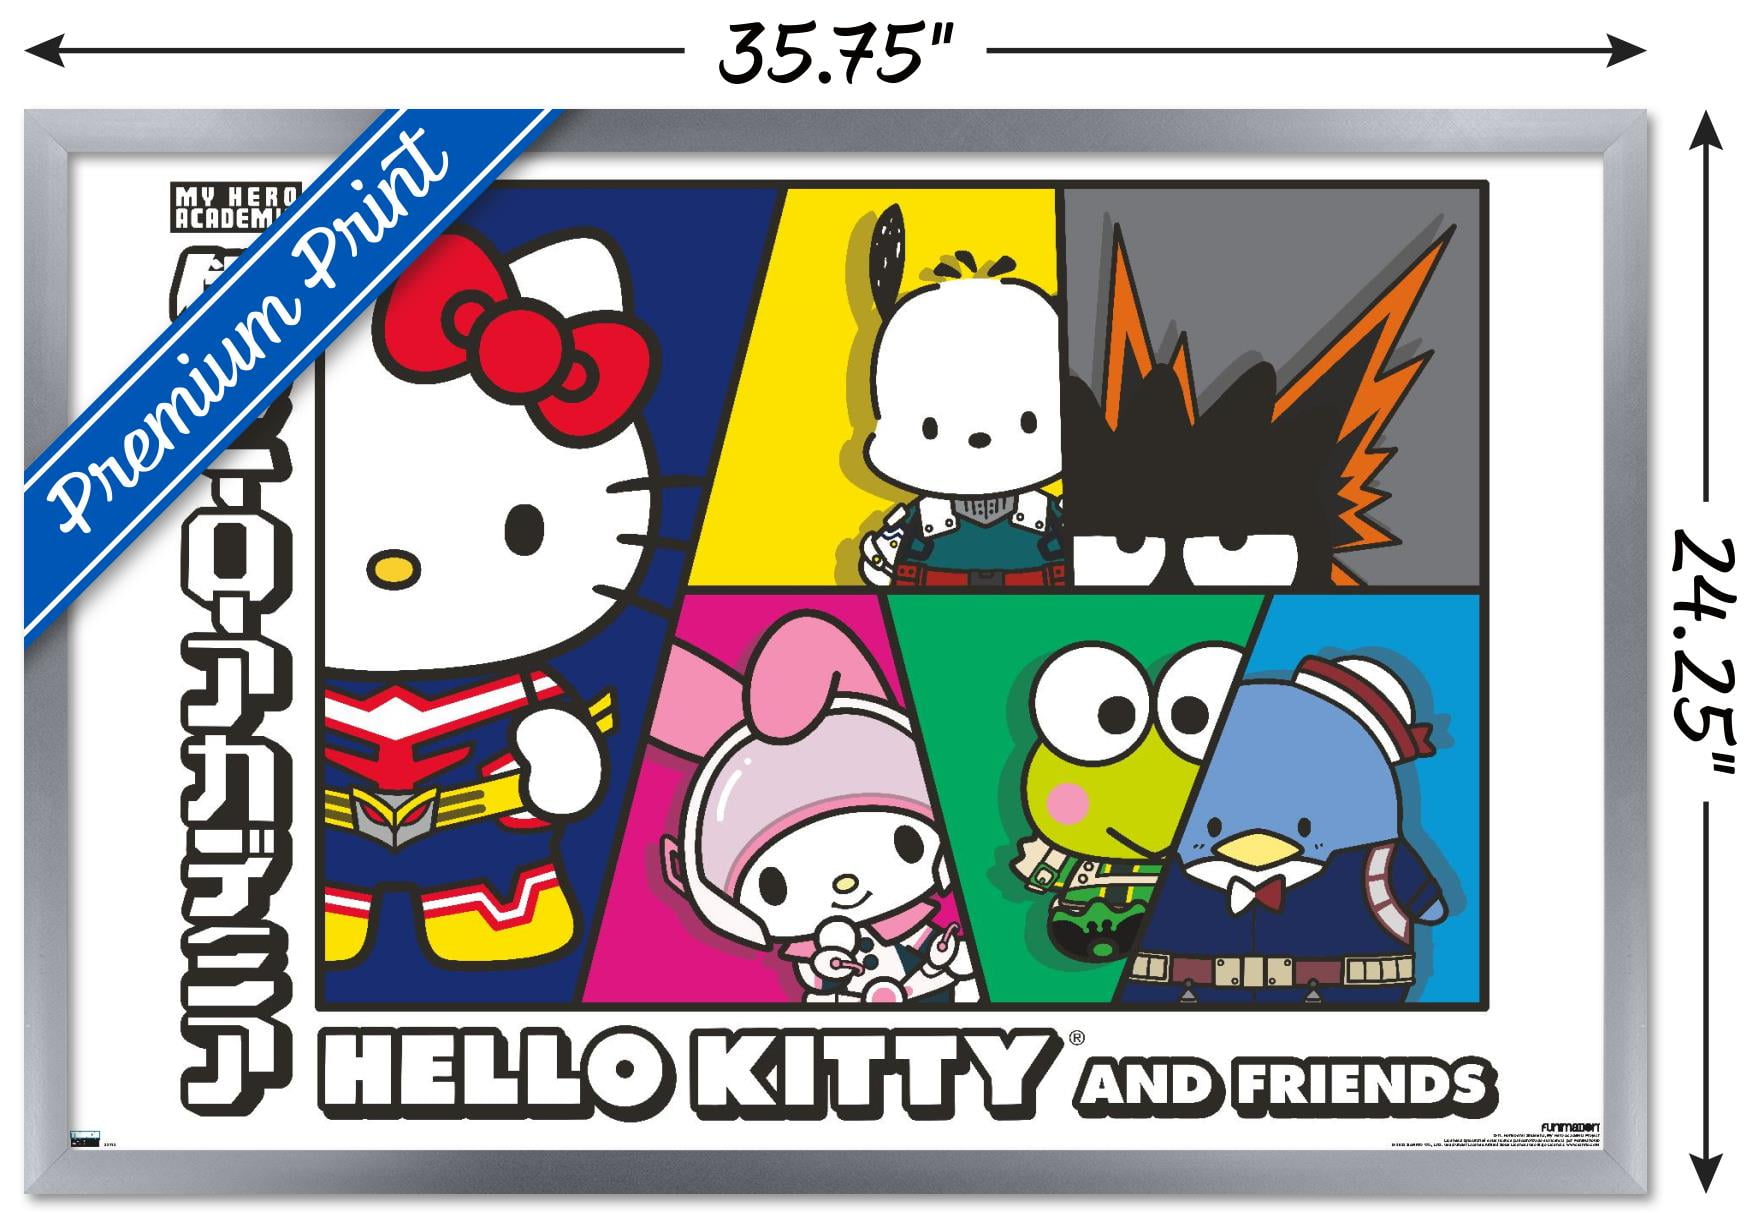 My Hero Academia X Hello Kitty And Friends - Shapes Wall Poster, 